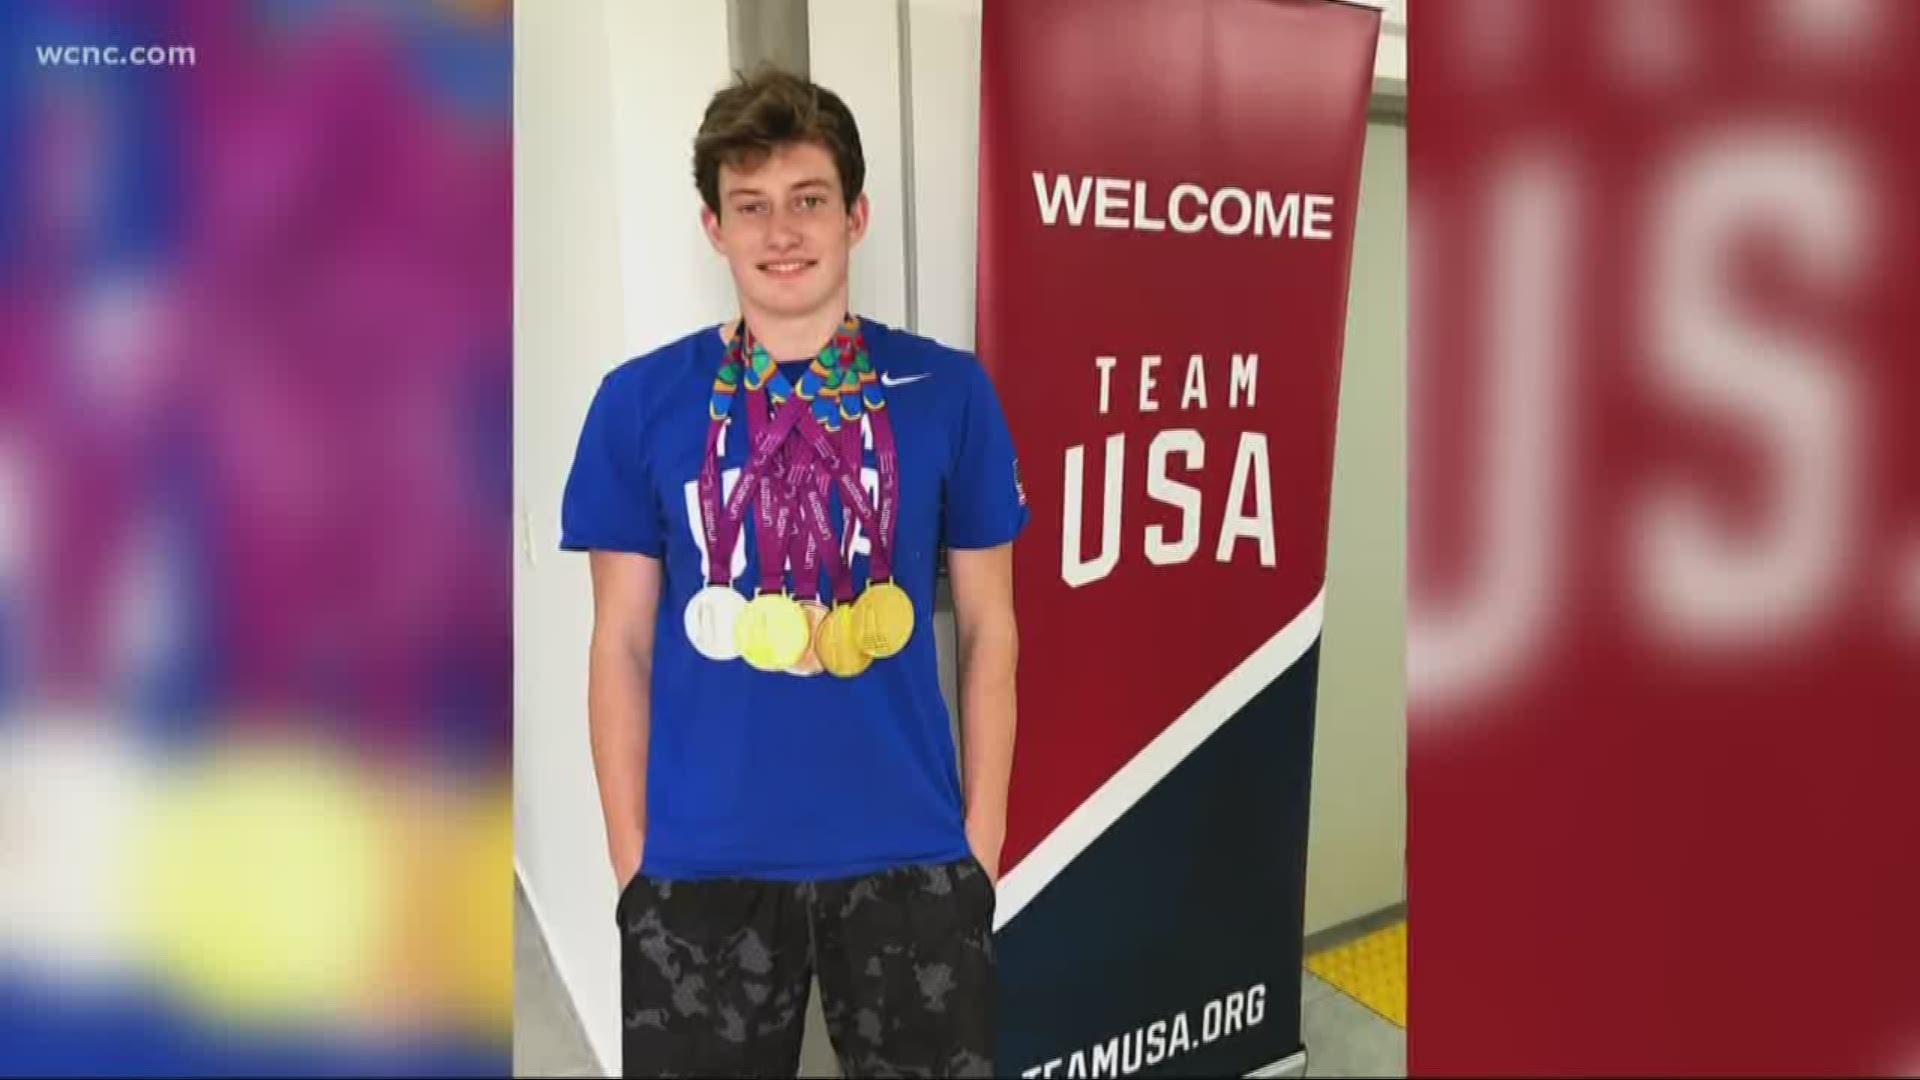 One Charlotte native has been swimming most of his life and up until last week, he was training to represent our country in the Paralympics.